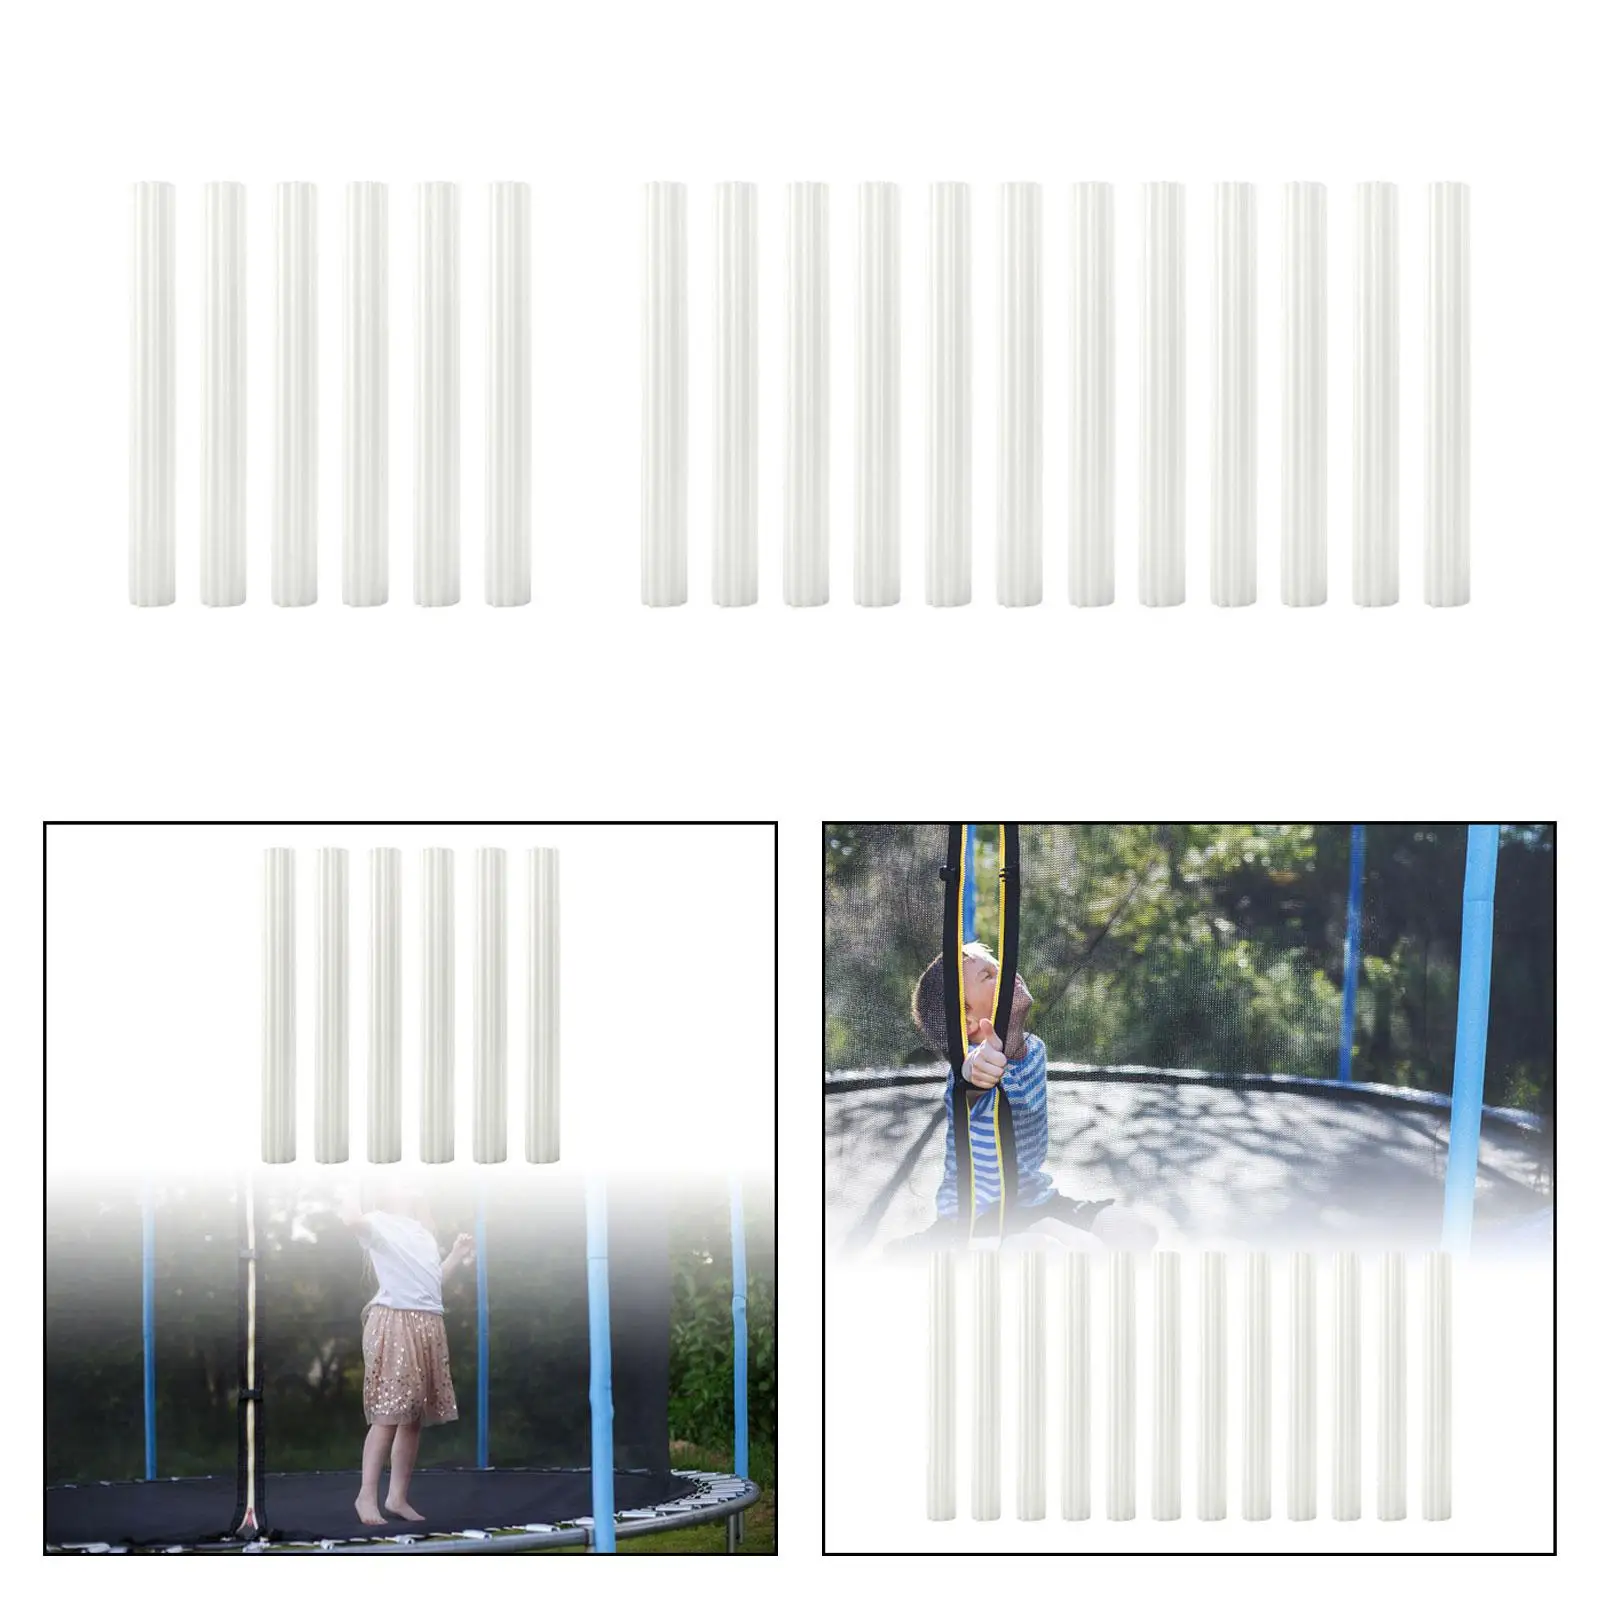 Trampoline Enclosure Pole Foam Sleeves Portable Protection Cover 25mm Padding Foam for Children Trampoline Accessories Indoor